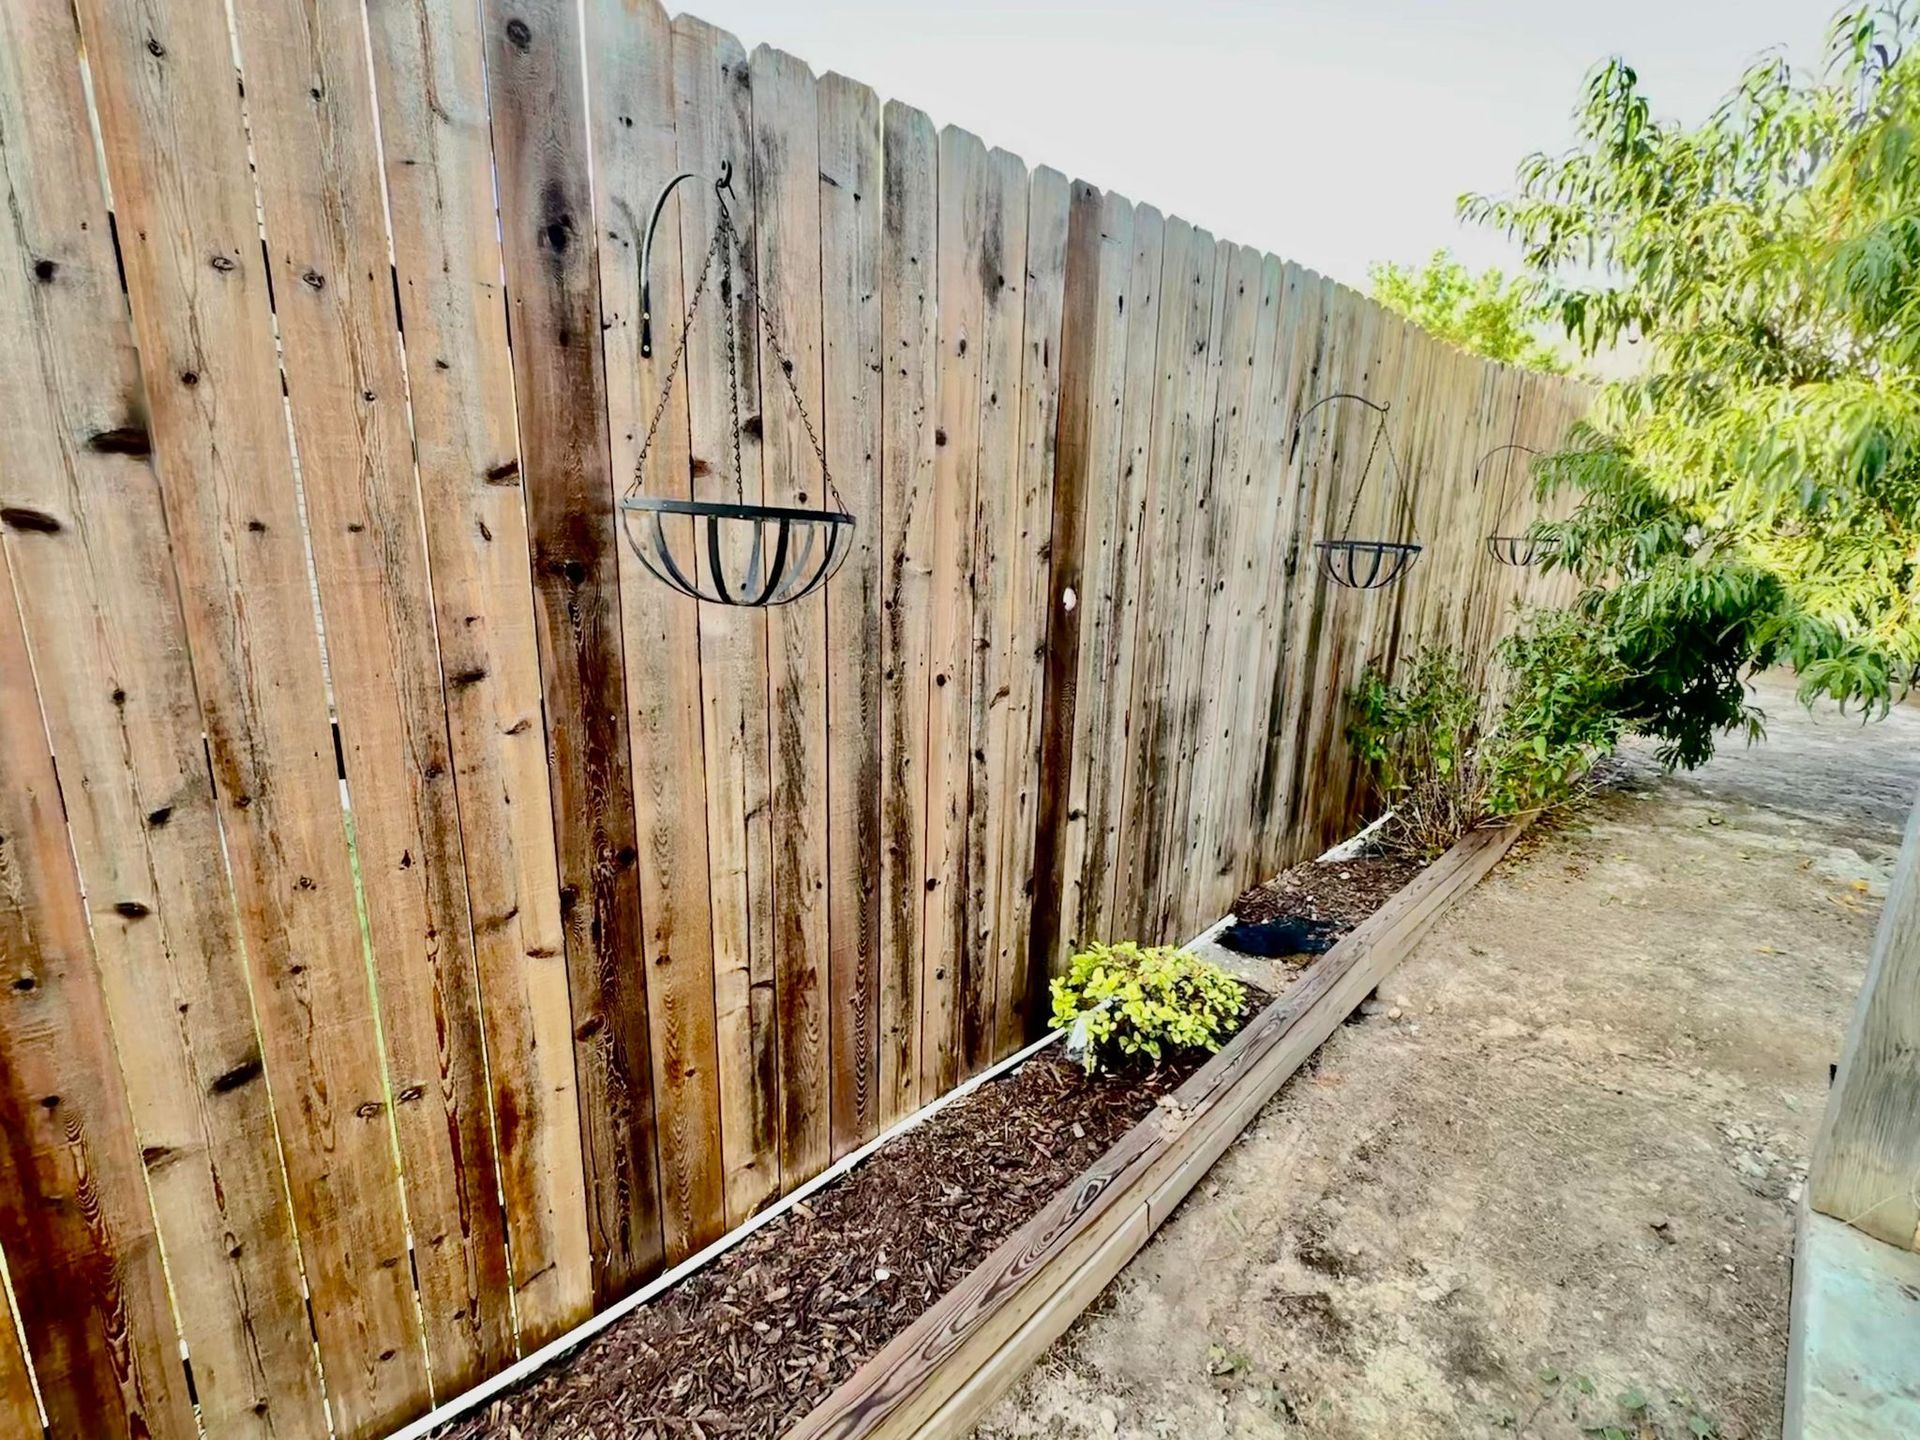 A wooden fence with planters hanging from it in a backyard.